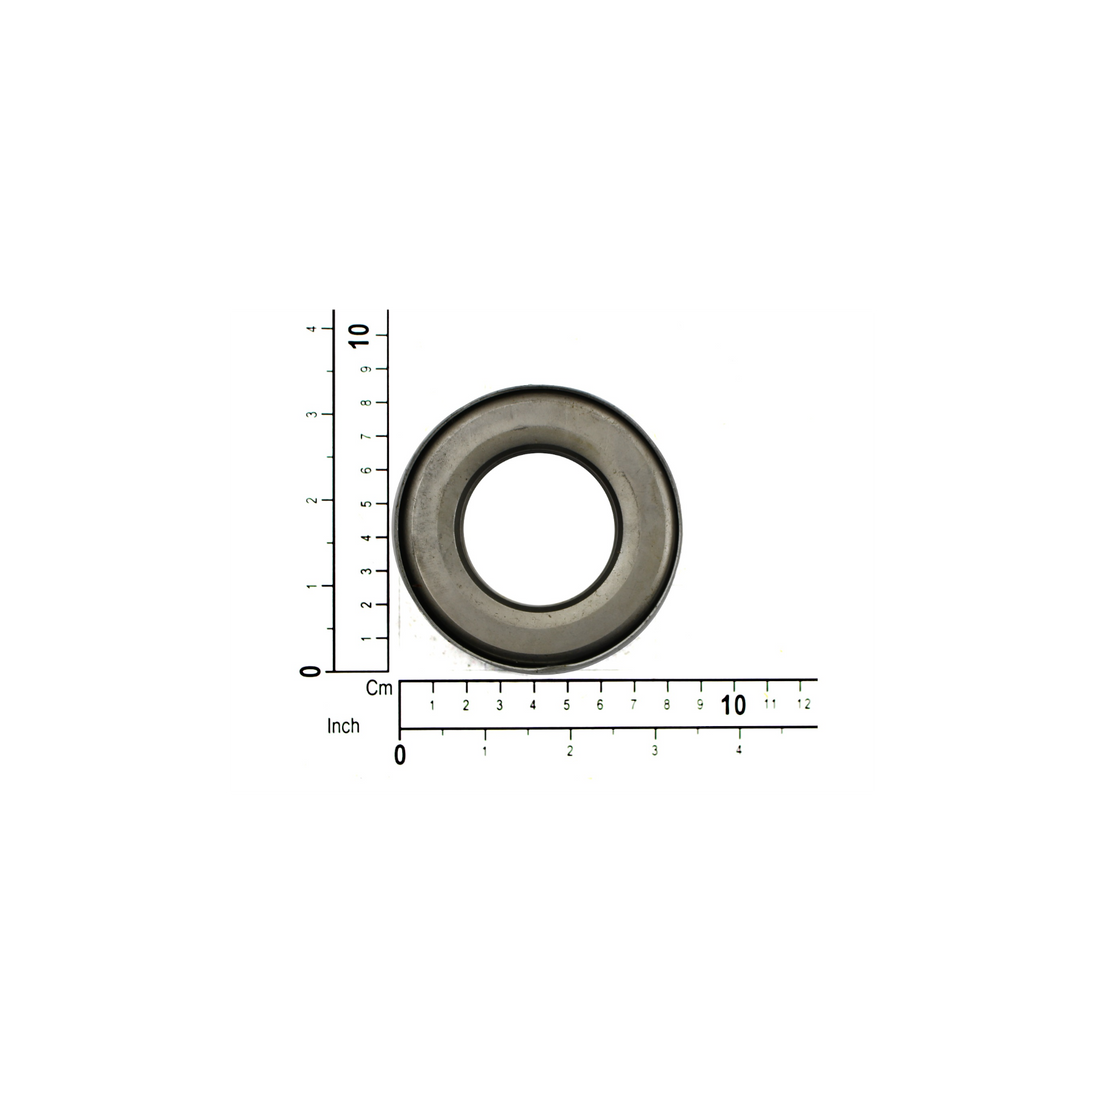 R&M Parts - Thrust Bearing, Part Number: 60012369